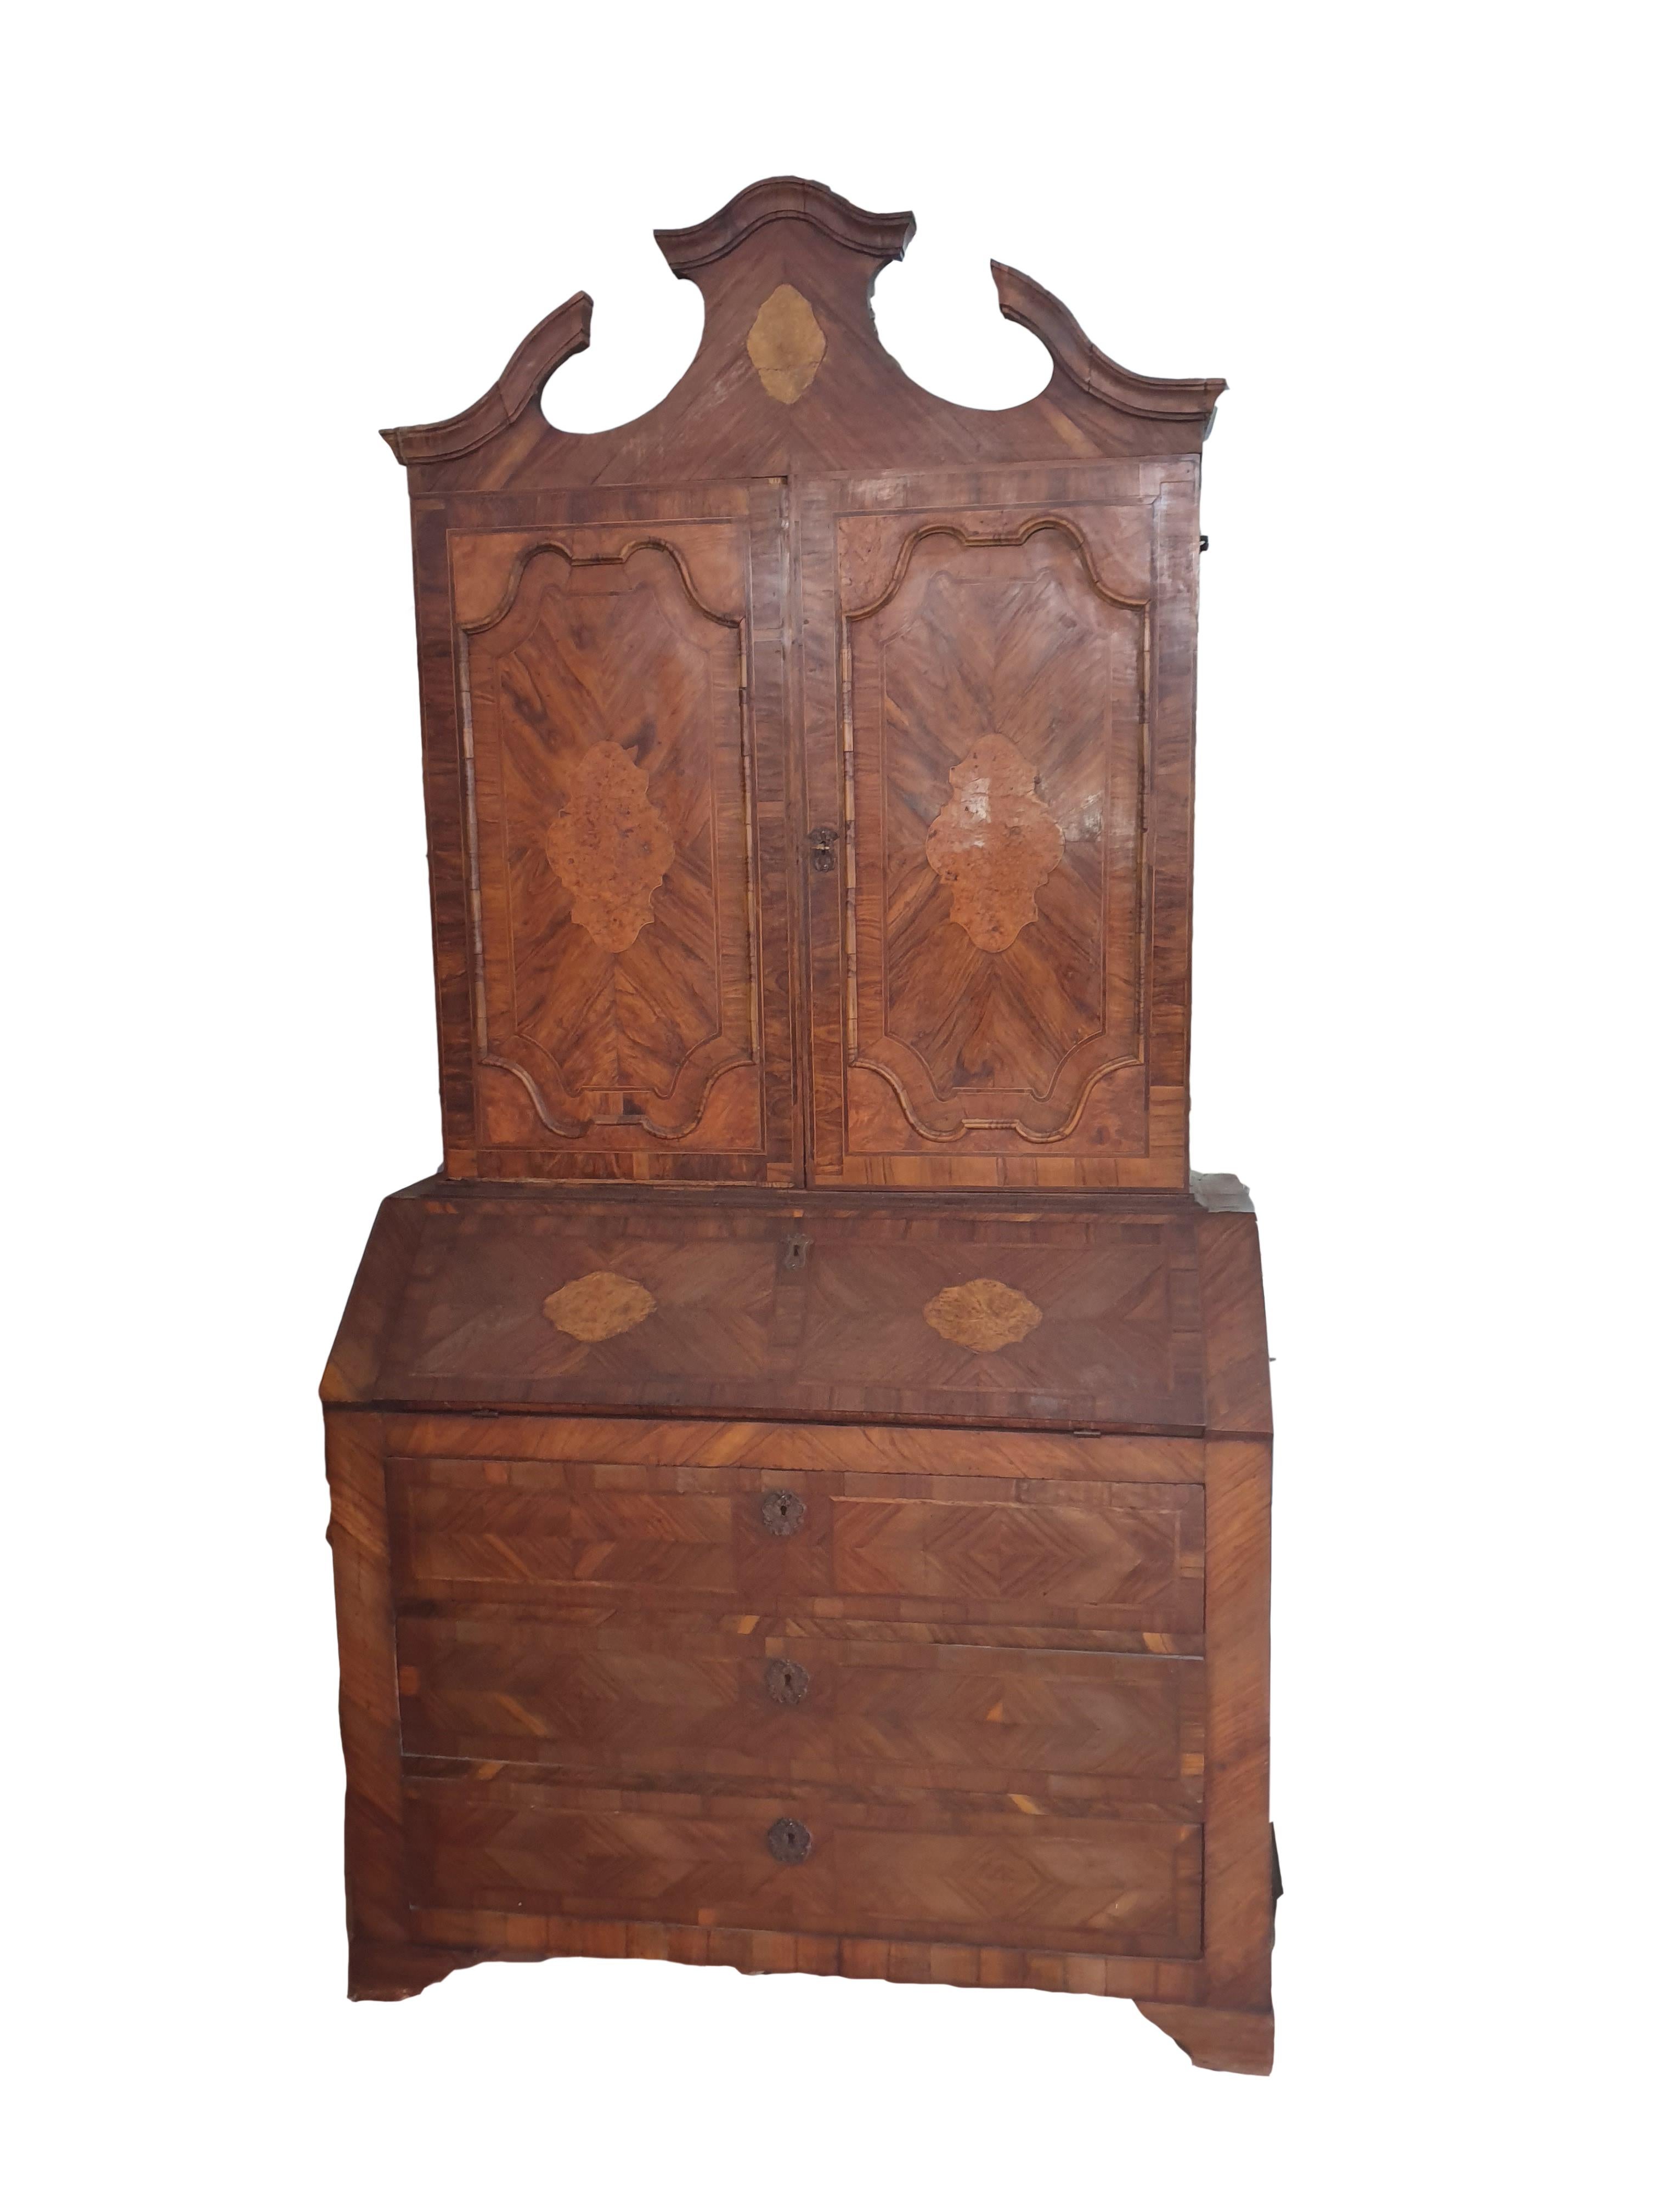 Important Sicilian Trumeau cabinet, with front flap, two upper doors and three drawers, veneered in walnut and briar walnut. Particular processing of the upper doors, inside painted with oil.
Sicily Louis XIV.